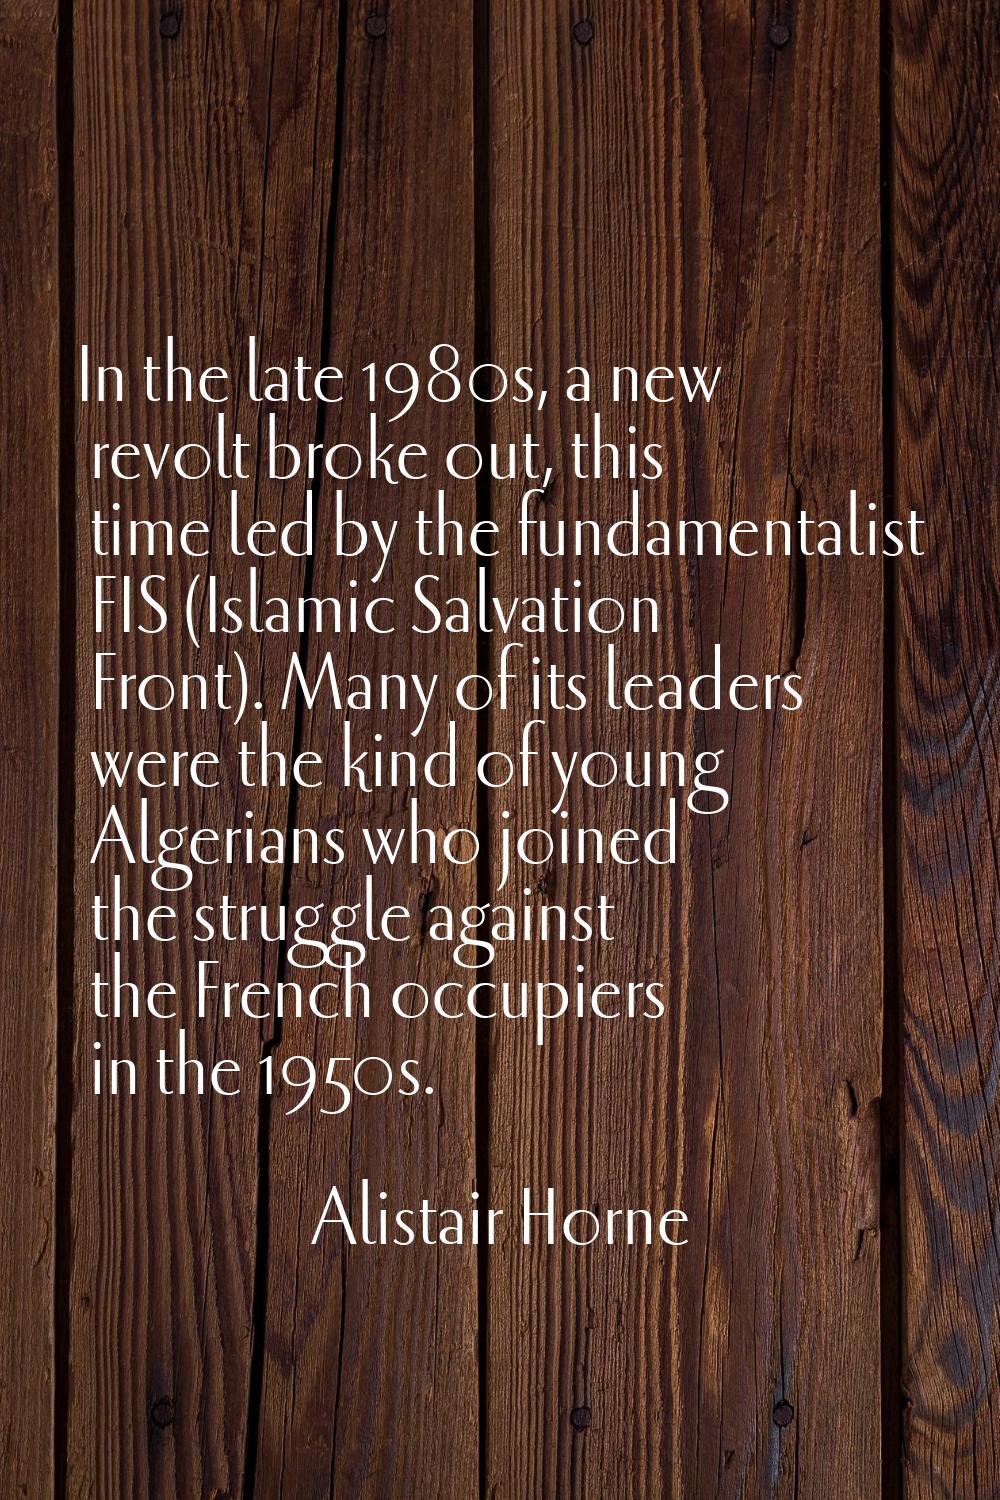 In the late 1980s, a new revolt broke out, this time led by the fundamentalist FIS (Islamic Salvati